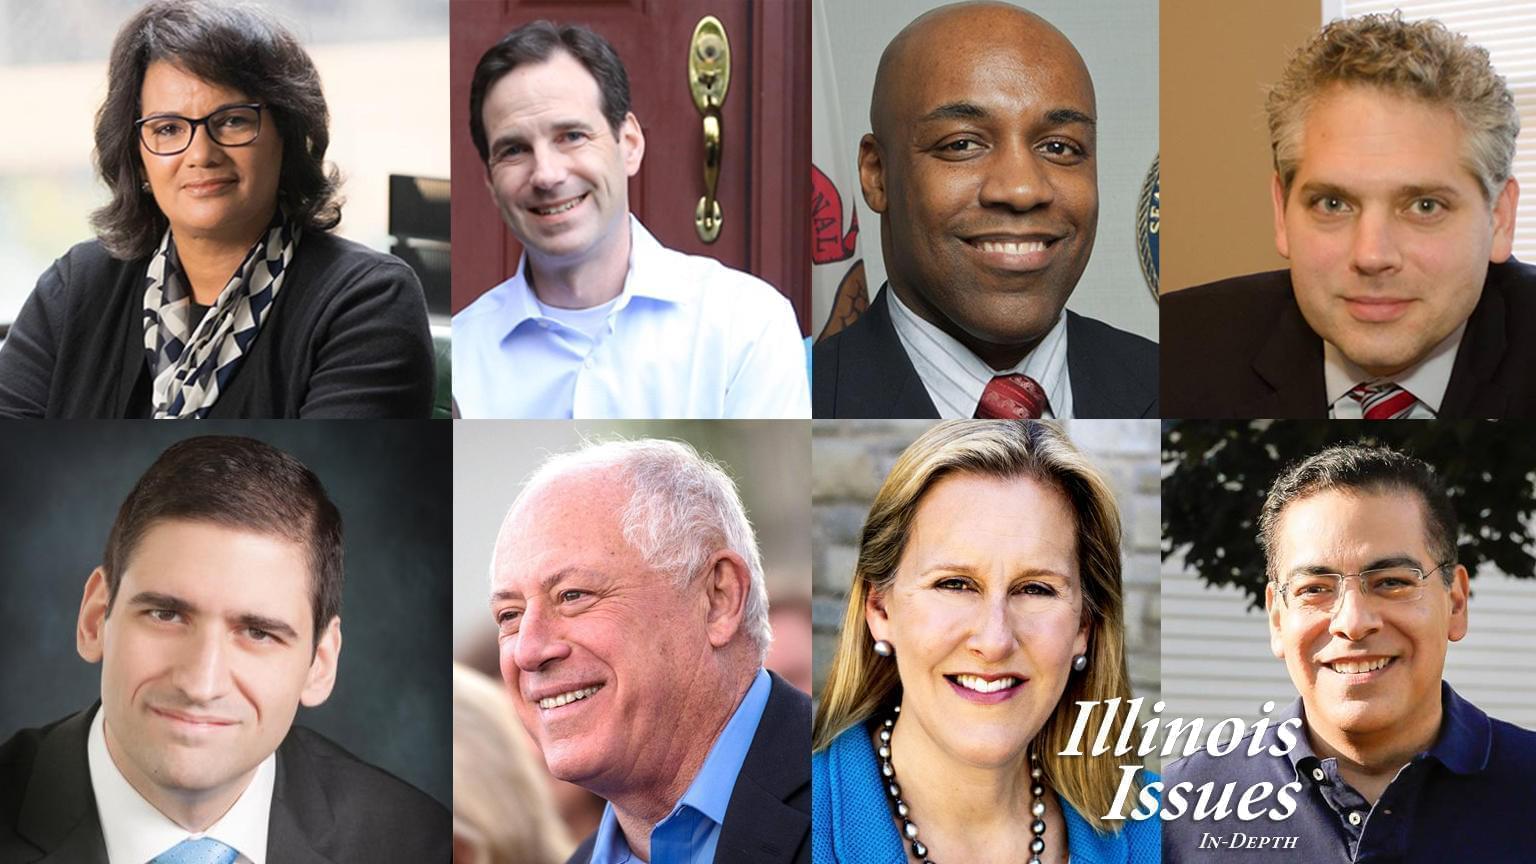 Democratic candidates for Attorney General. From left to right: Sharon Fairley, state Rep. Scott Drury, state Sen. Kwame Raoul, Aaron Goldstein, Renato Mariotti, former Gov. Pat Quinn, Nancy Rotering and Jessie Ruiz.